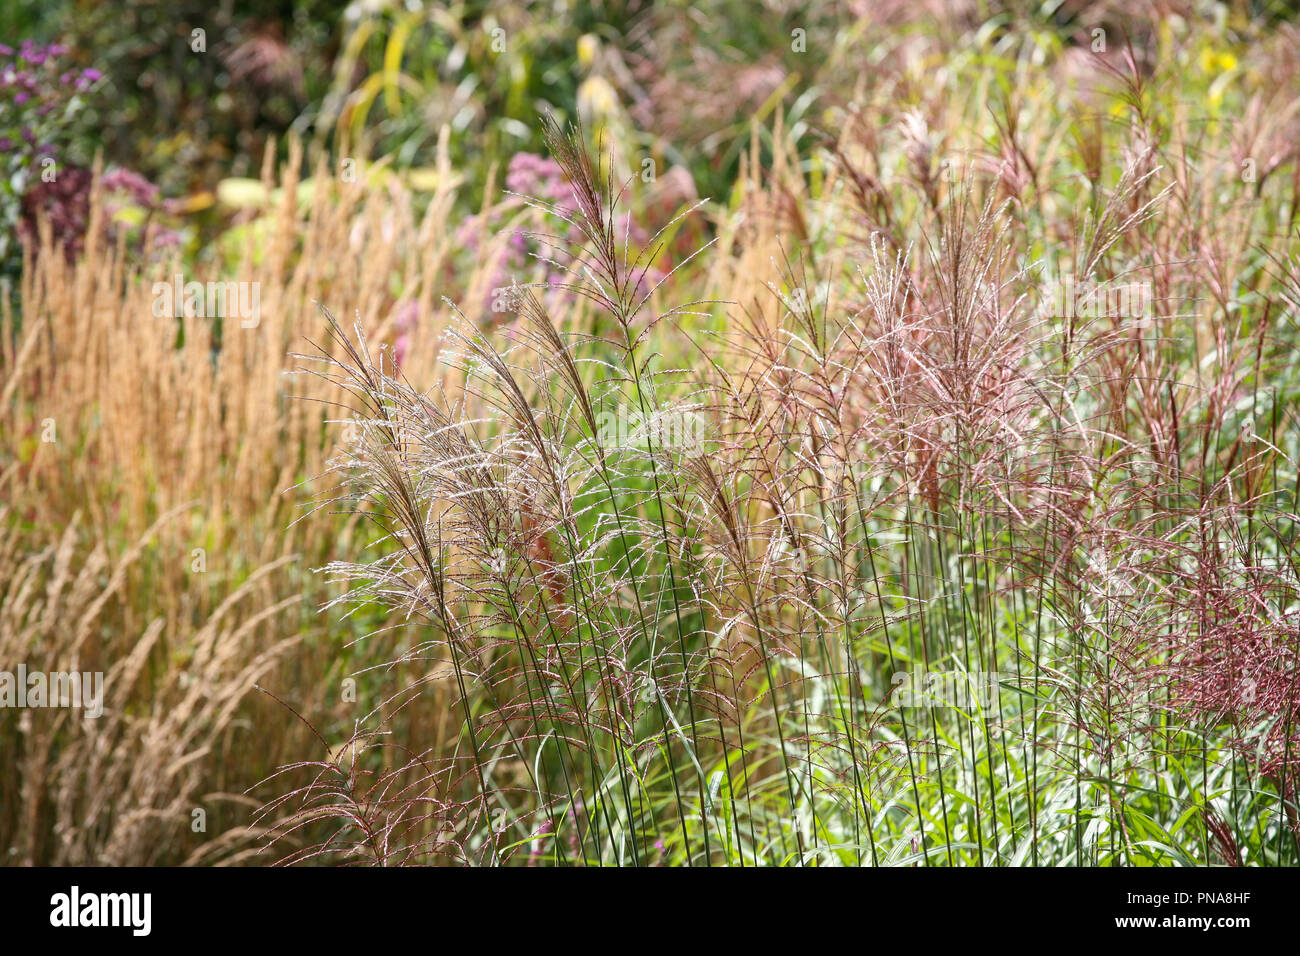 Mixture of flowering ornamental grasses - Miscanthus, Molinia, Calamagrostis, in late summer / early autumn Stock Photo